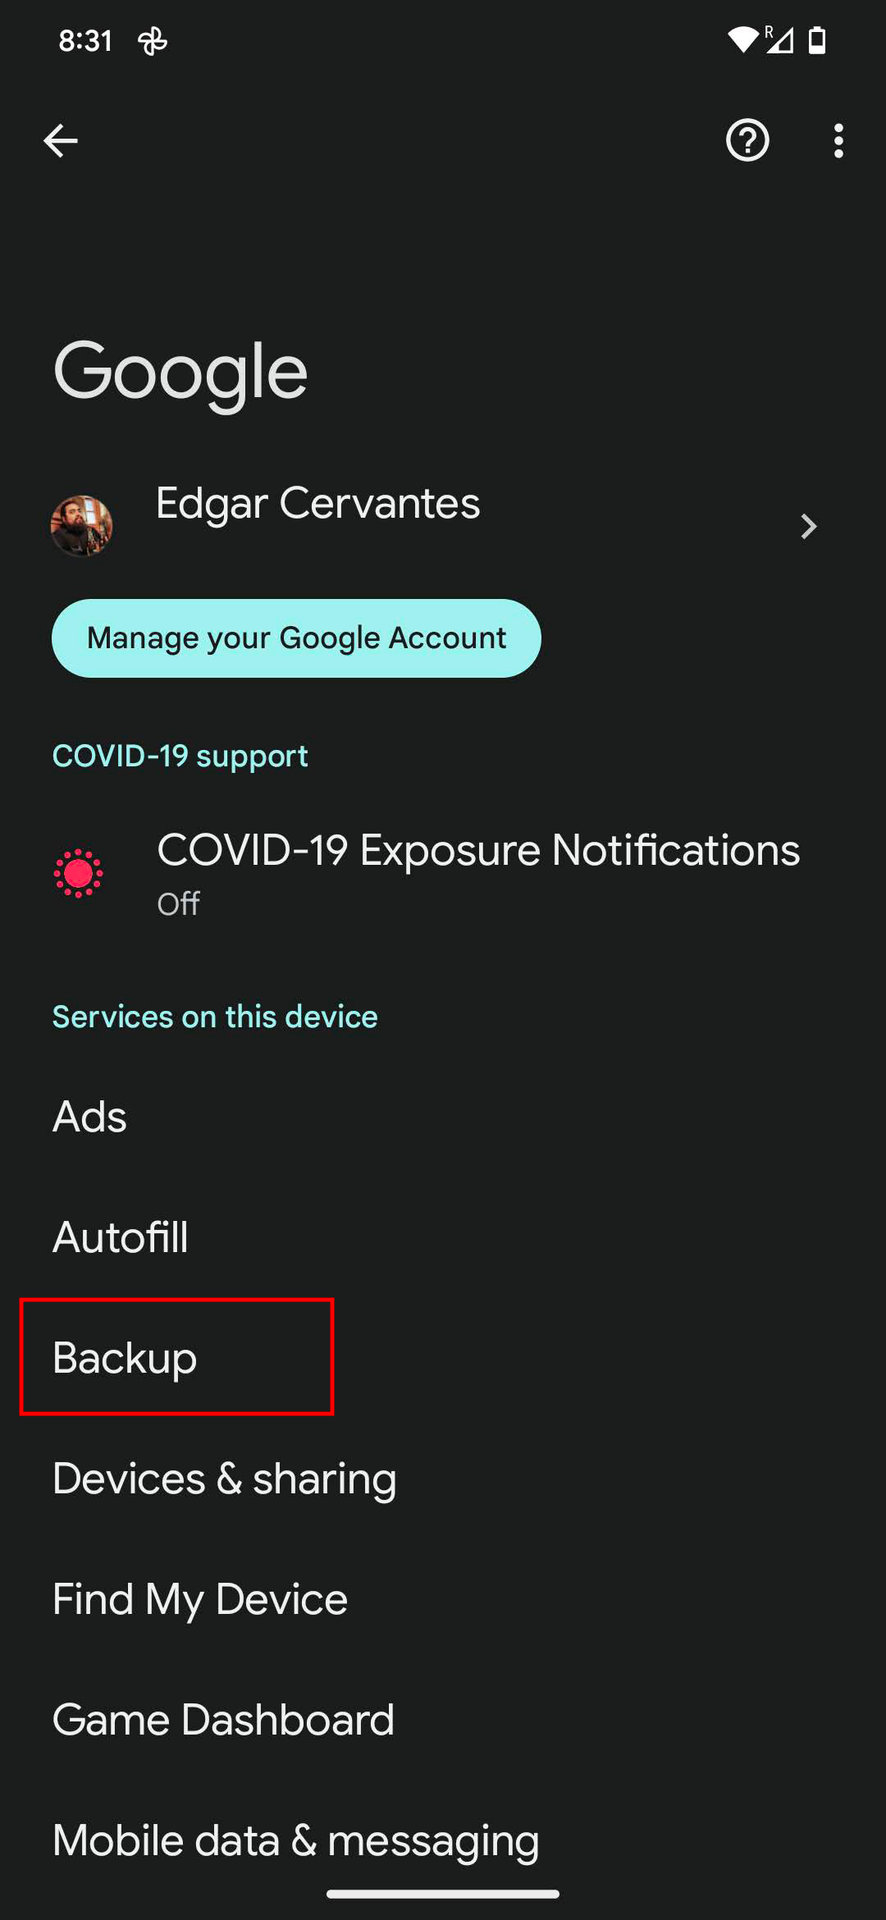 How to backup your text messages to Google Drive 2